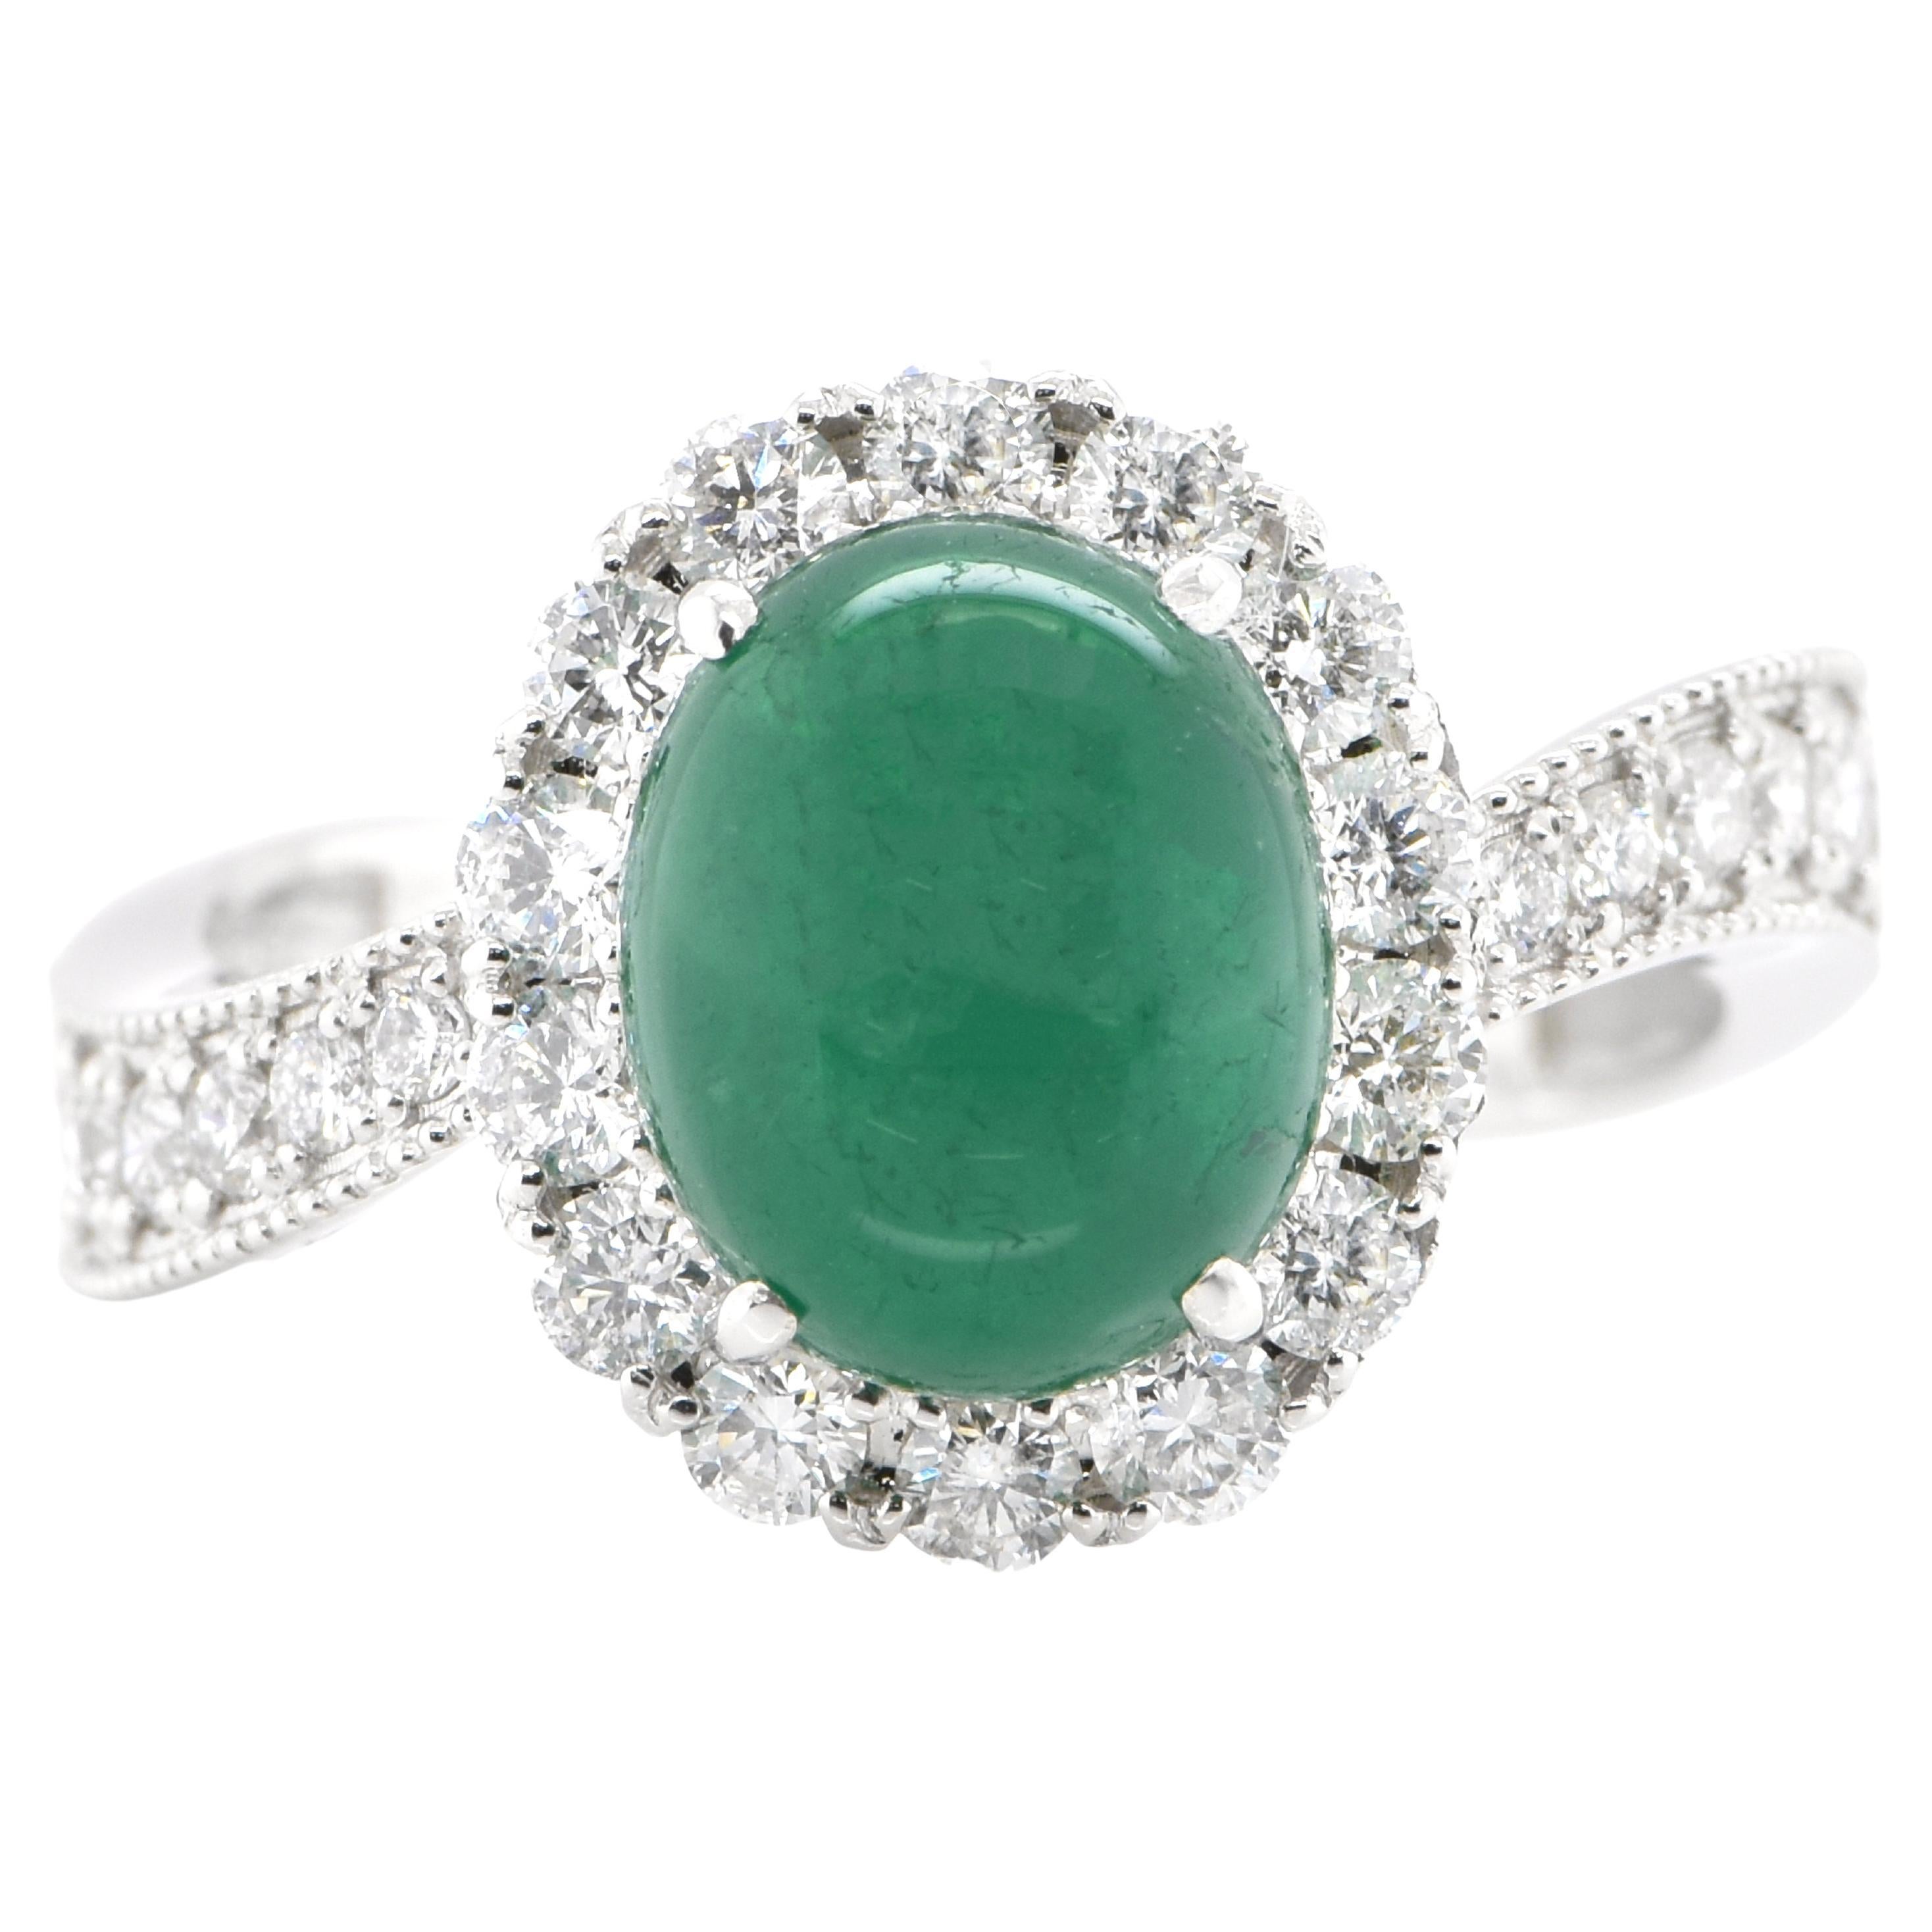 2.70 Carat Natural Emerald Cabochon and Diamond Ring Set in Platinum For Sale